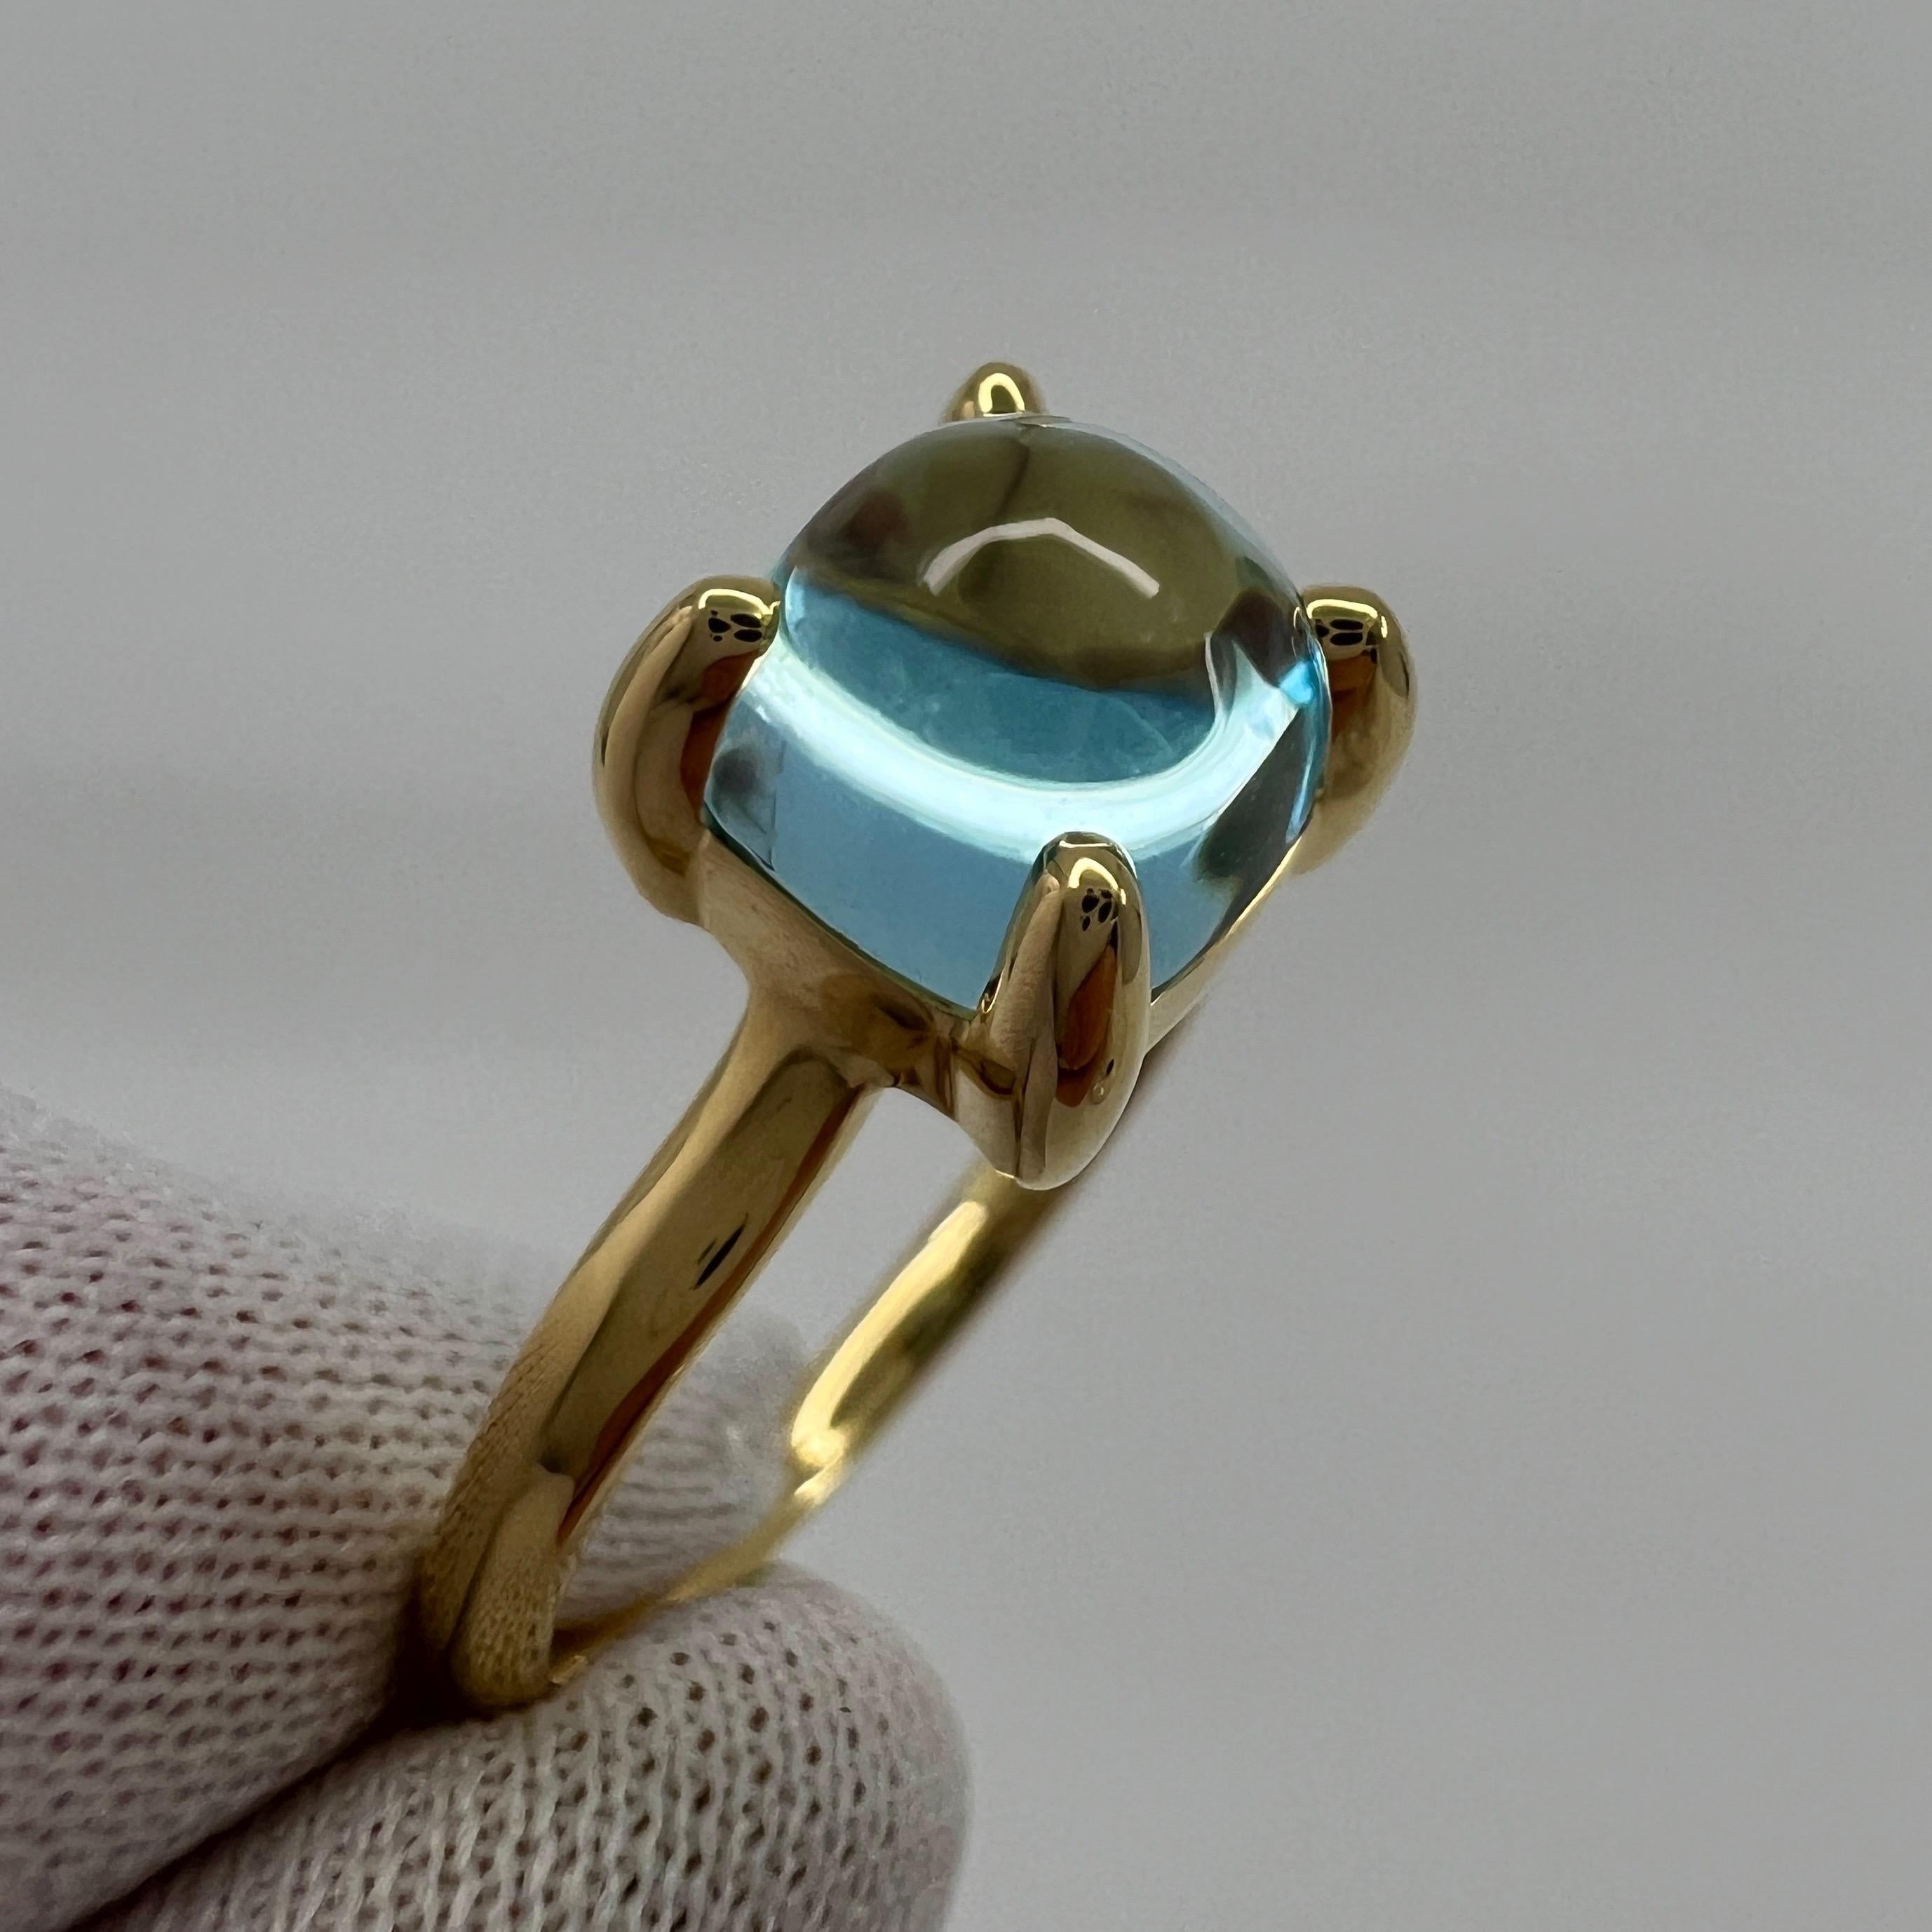 Rare Vintage Tiffany & Co. Paloma Picasso Blue Aquamarine Sugar Stack 18k Yellow Gold Ring.

A beautiful and rare sugarloaf blue aquamarine ring from the Tiffany & Co Paloma Picasso collection.

Fine jewellery houses like Tiffany only use the finest